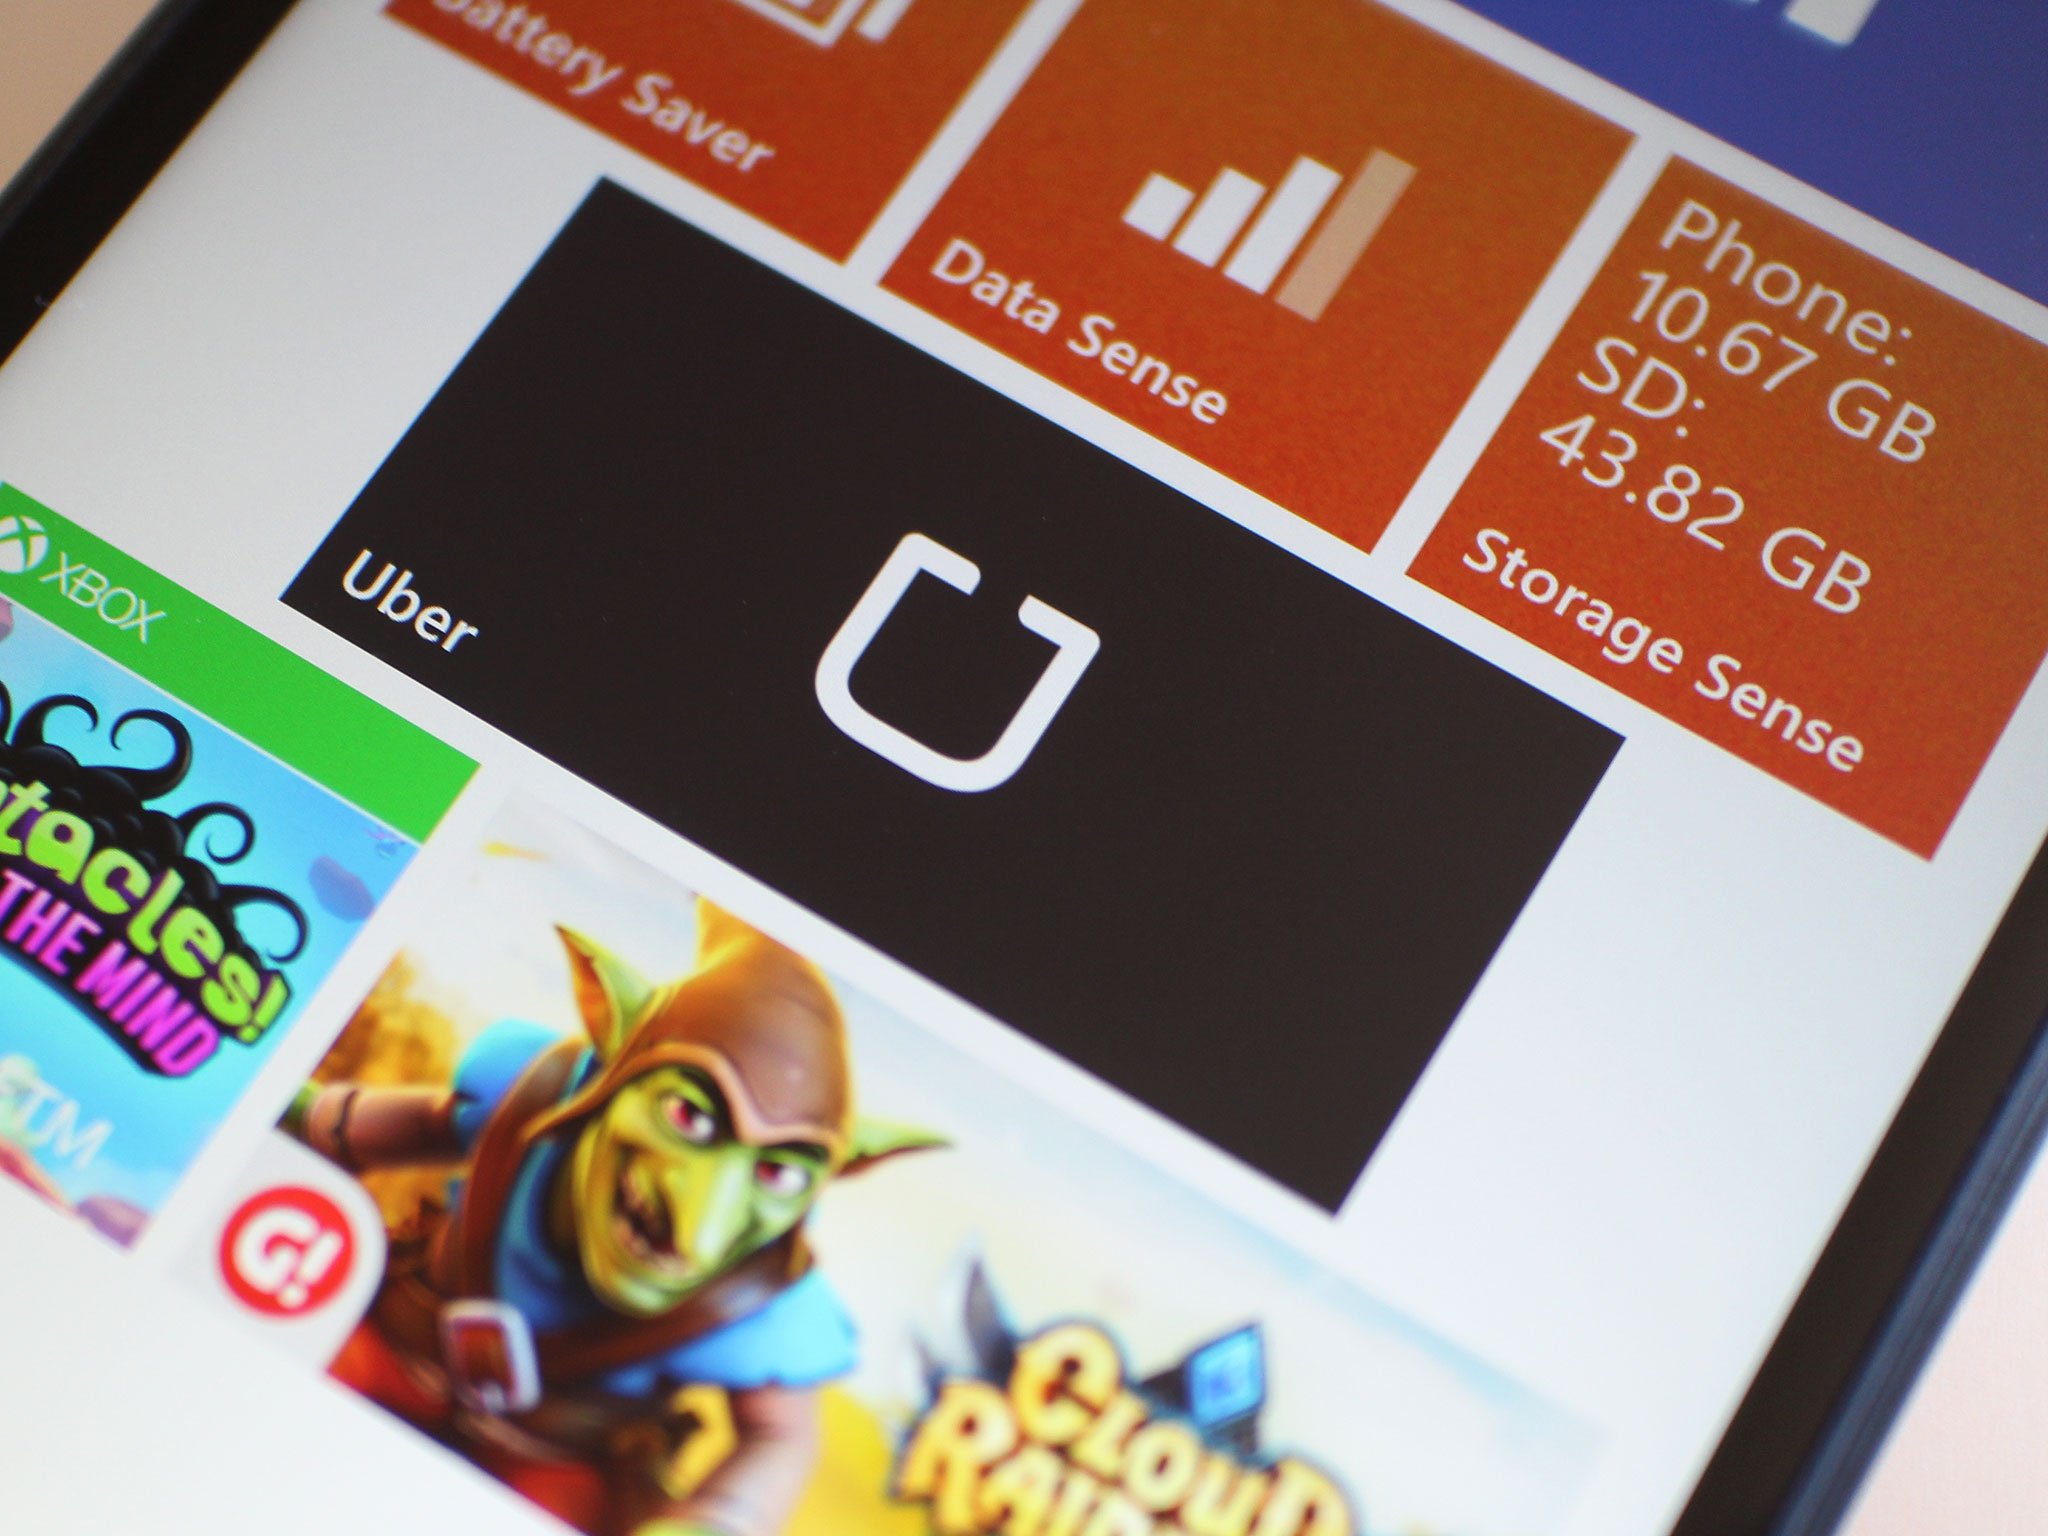 Uber for Windows Phone updated with performance improvements | Windows Central